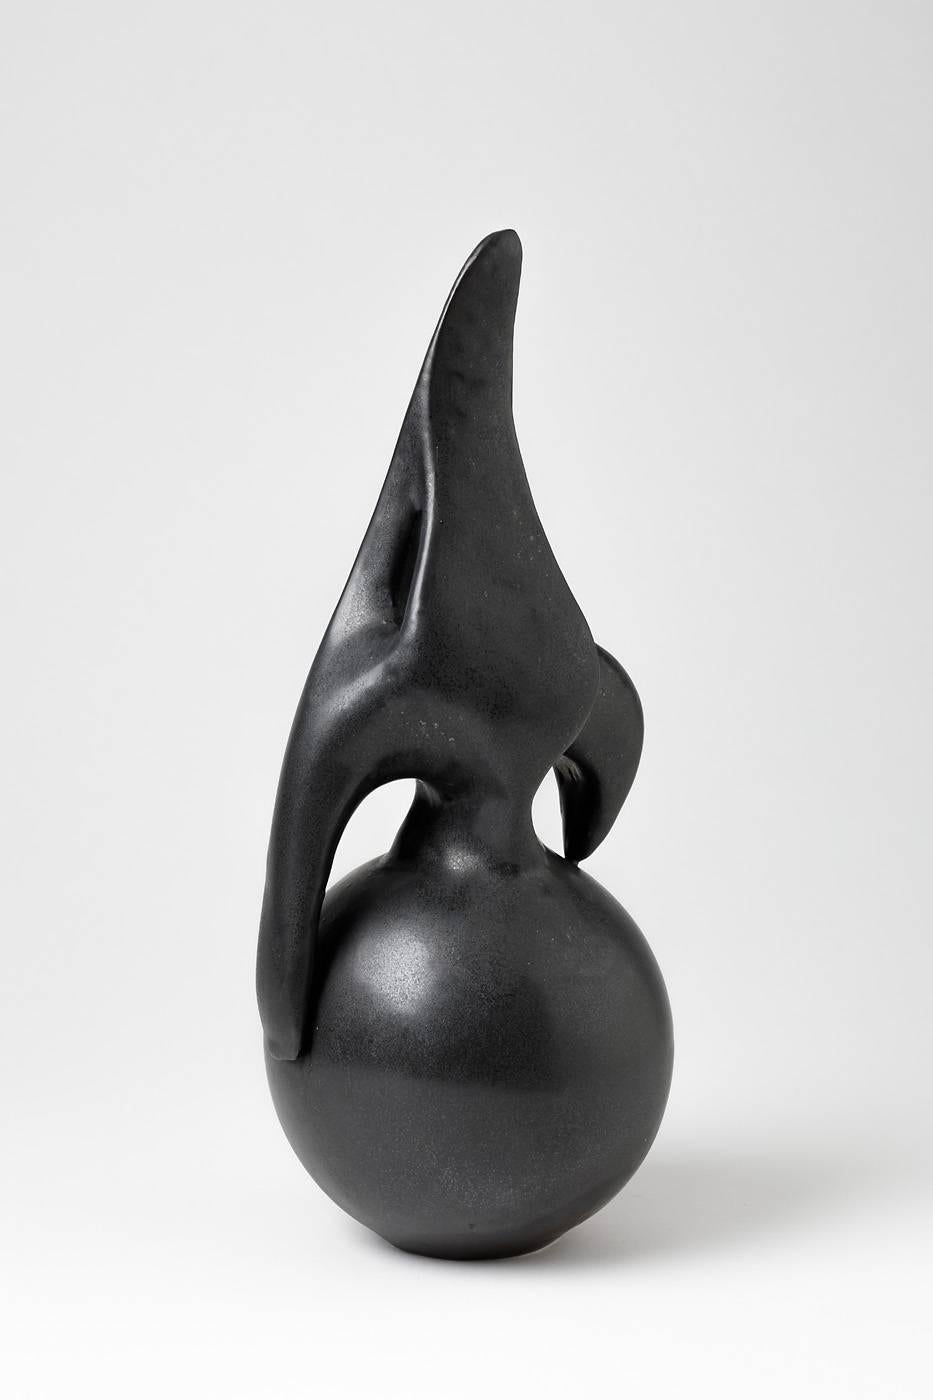 Elegant abstract sculpture by Tim Orr.

Porcelain sculpture with beautiful black ceramic glaze.

Signed under the base, circa 1970.